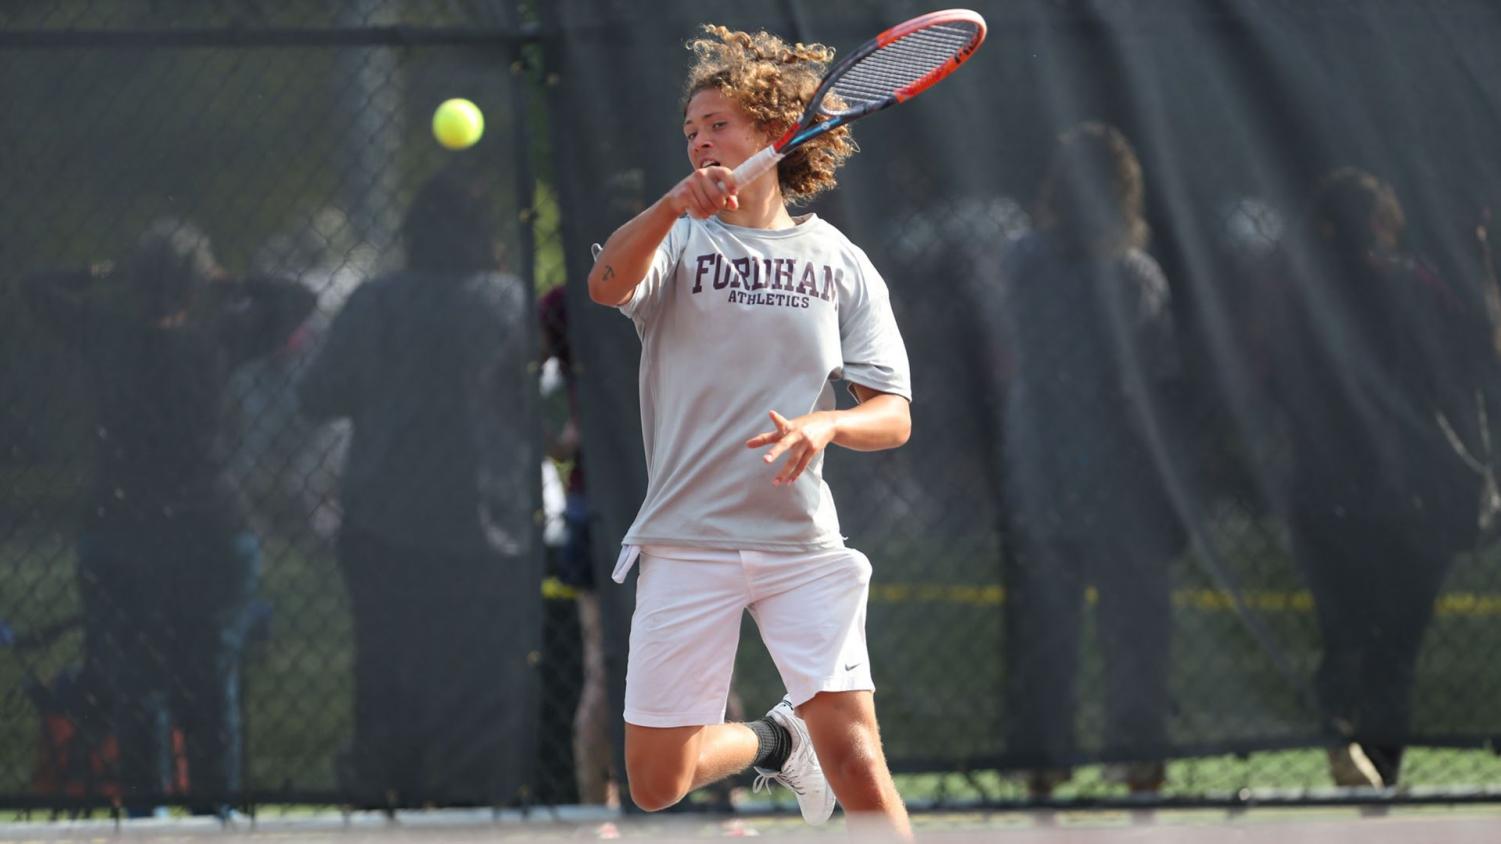 After a win over Hofstra on Friday, the weekend quickly went south for Fordham Men's Tennis. (Courtesy of Fordham Athletics)